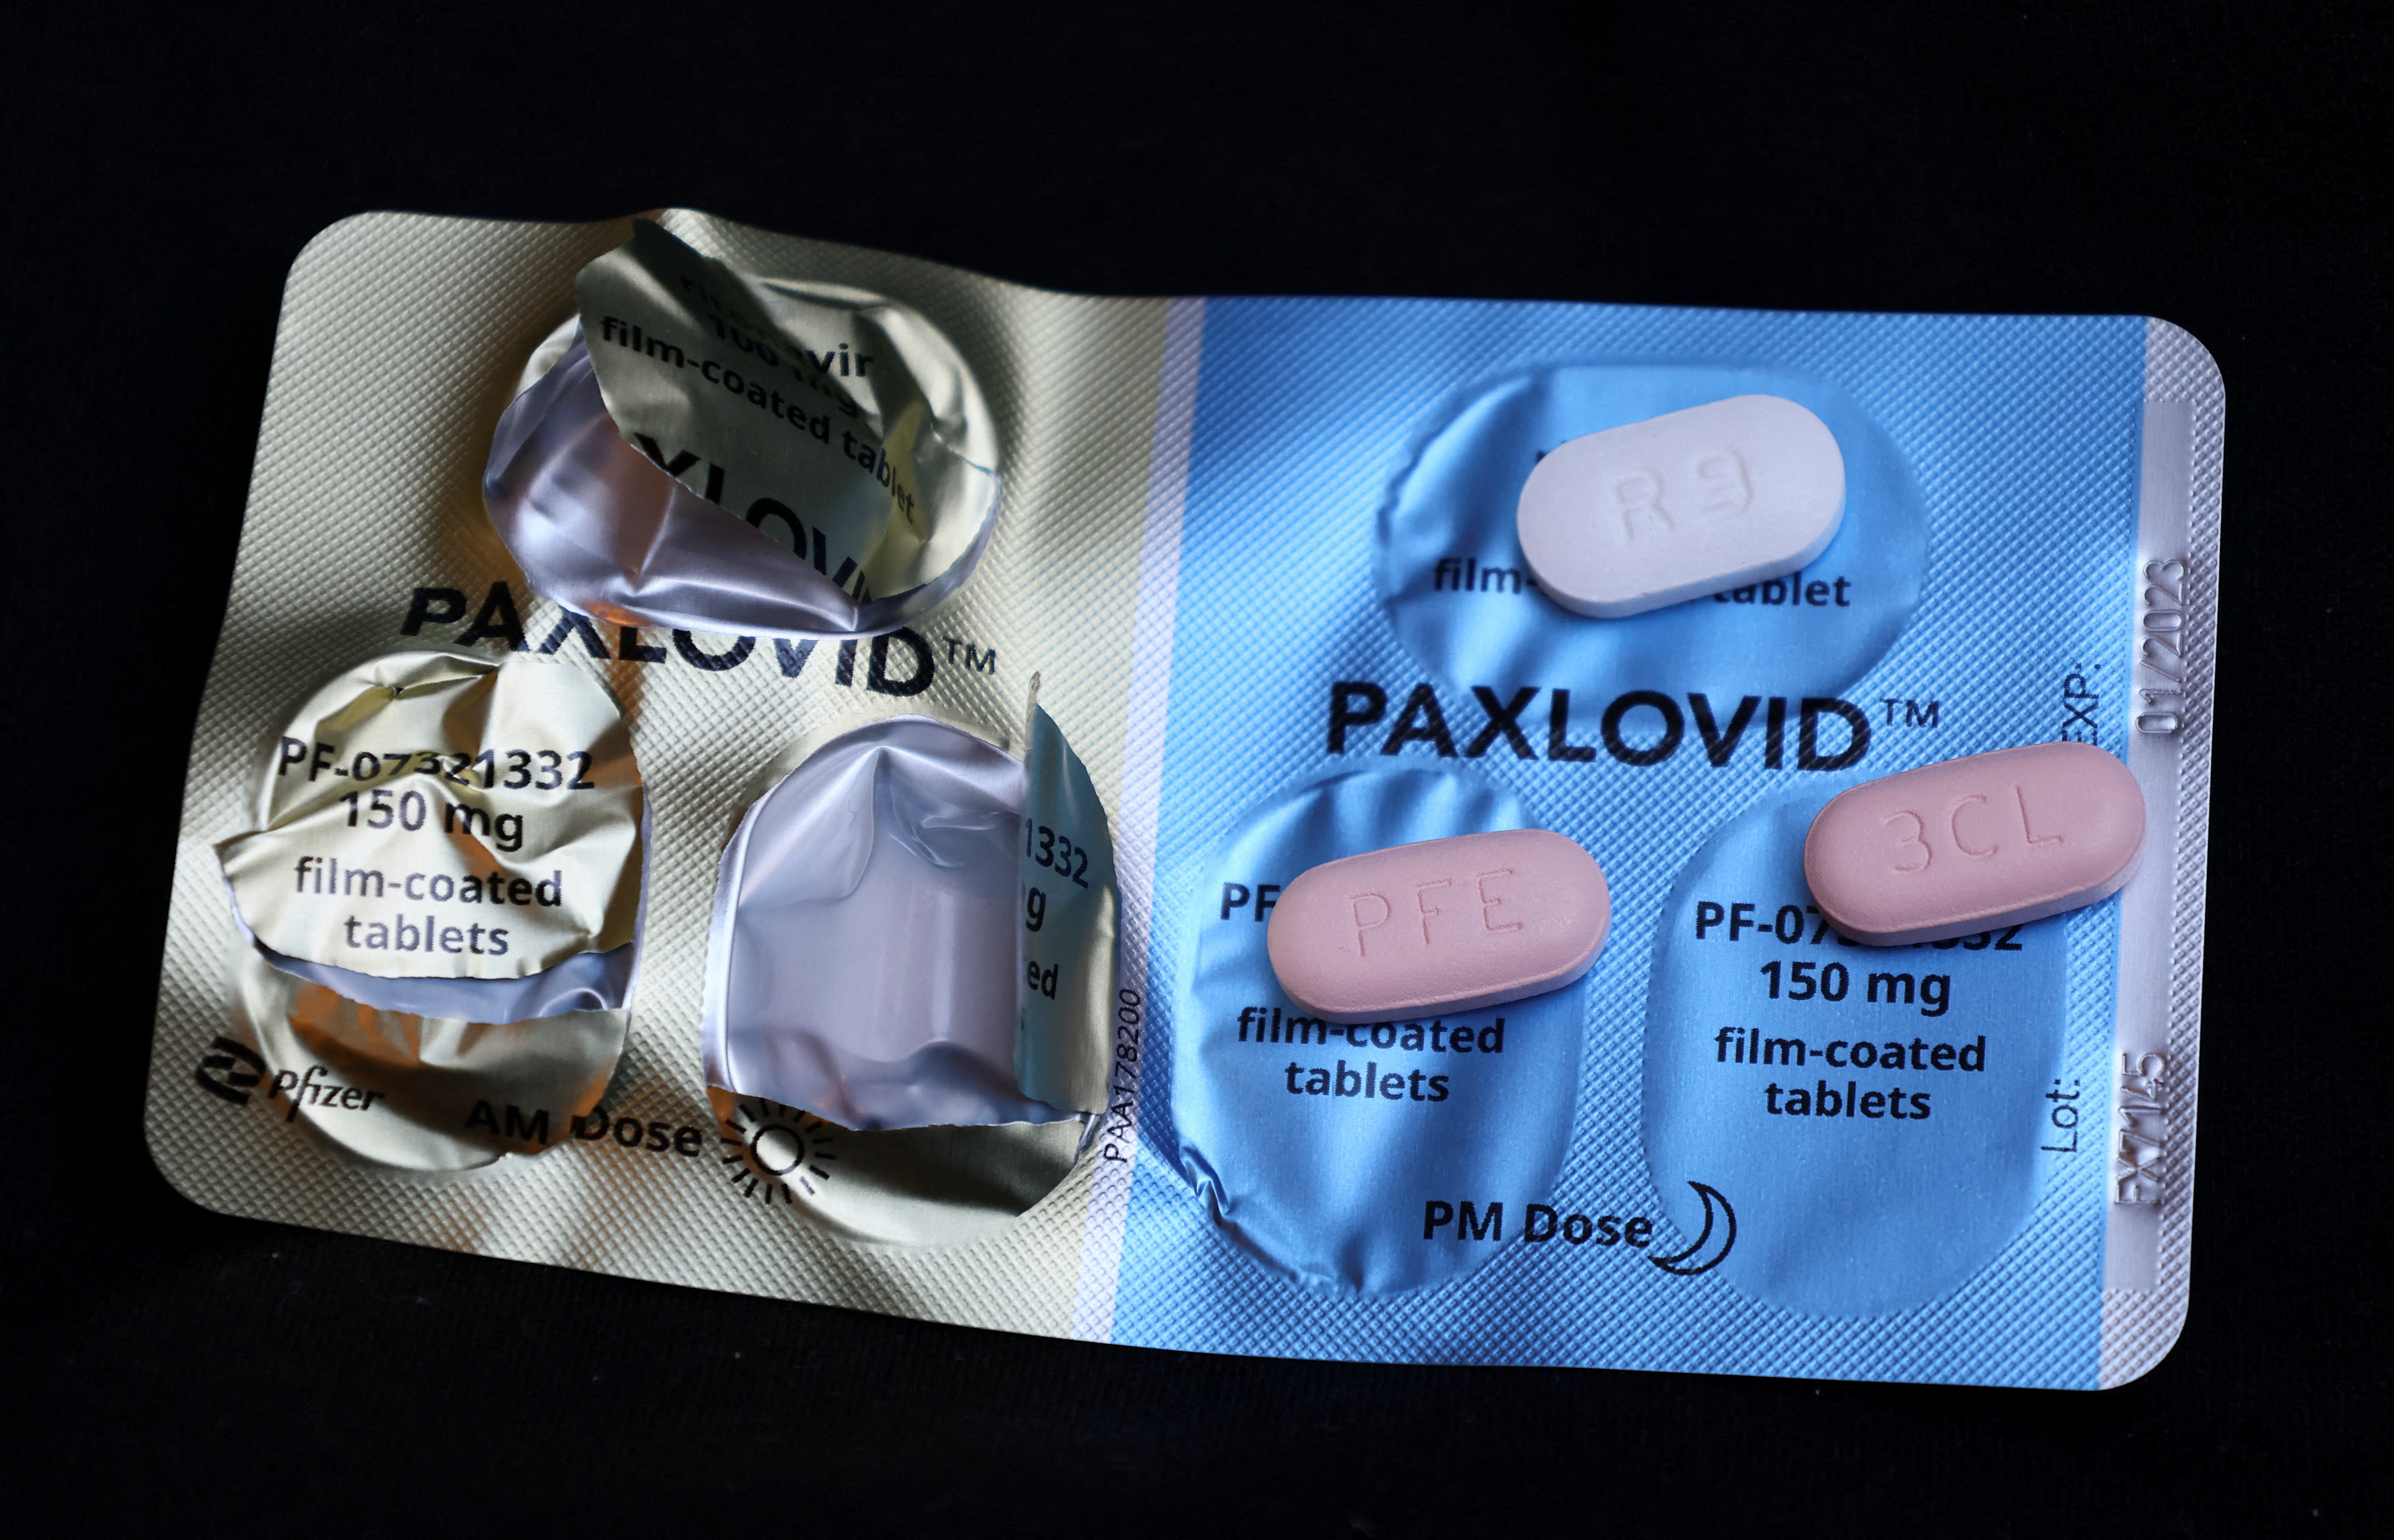 Paxlovid is shown in this picture illustration